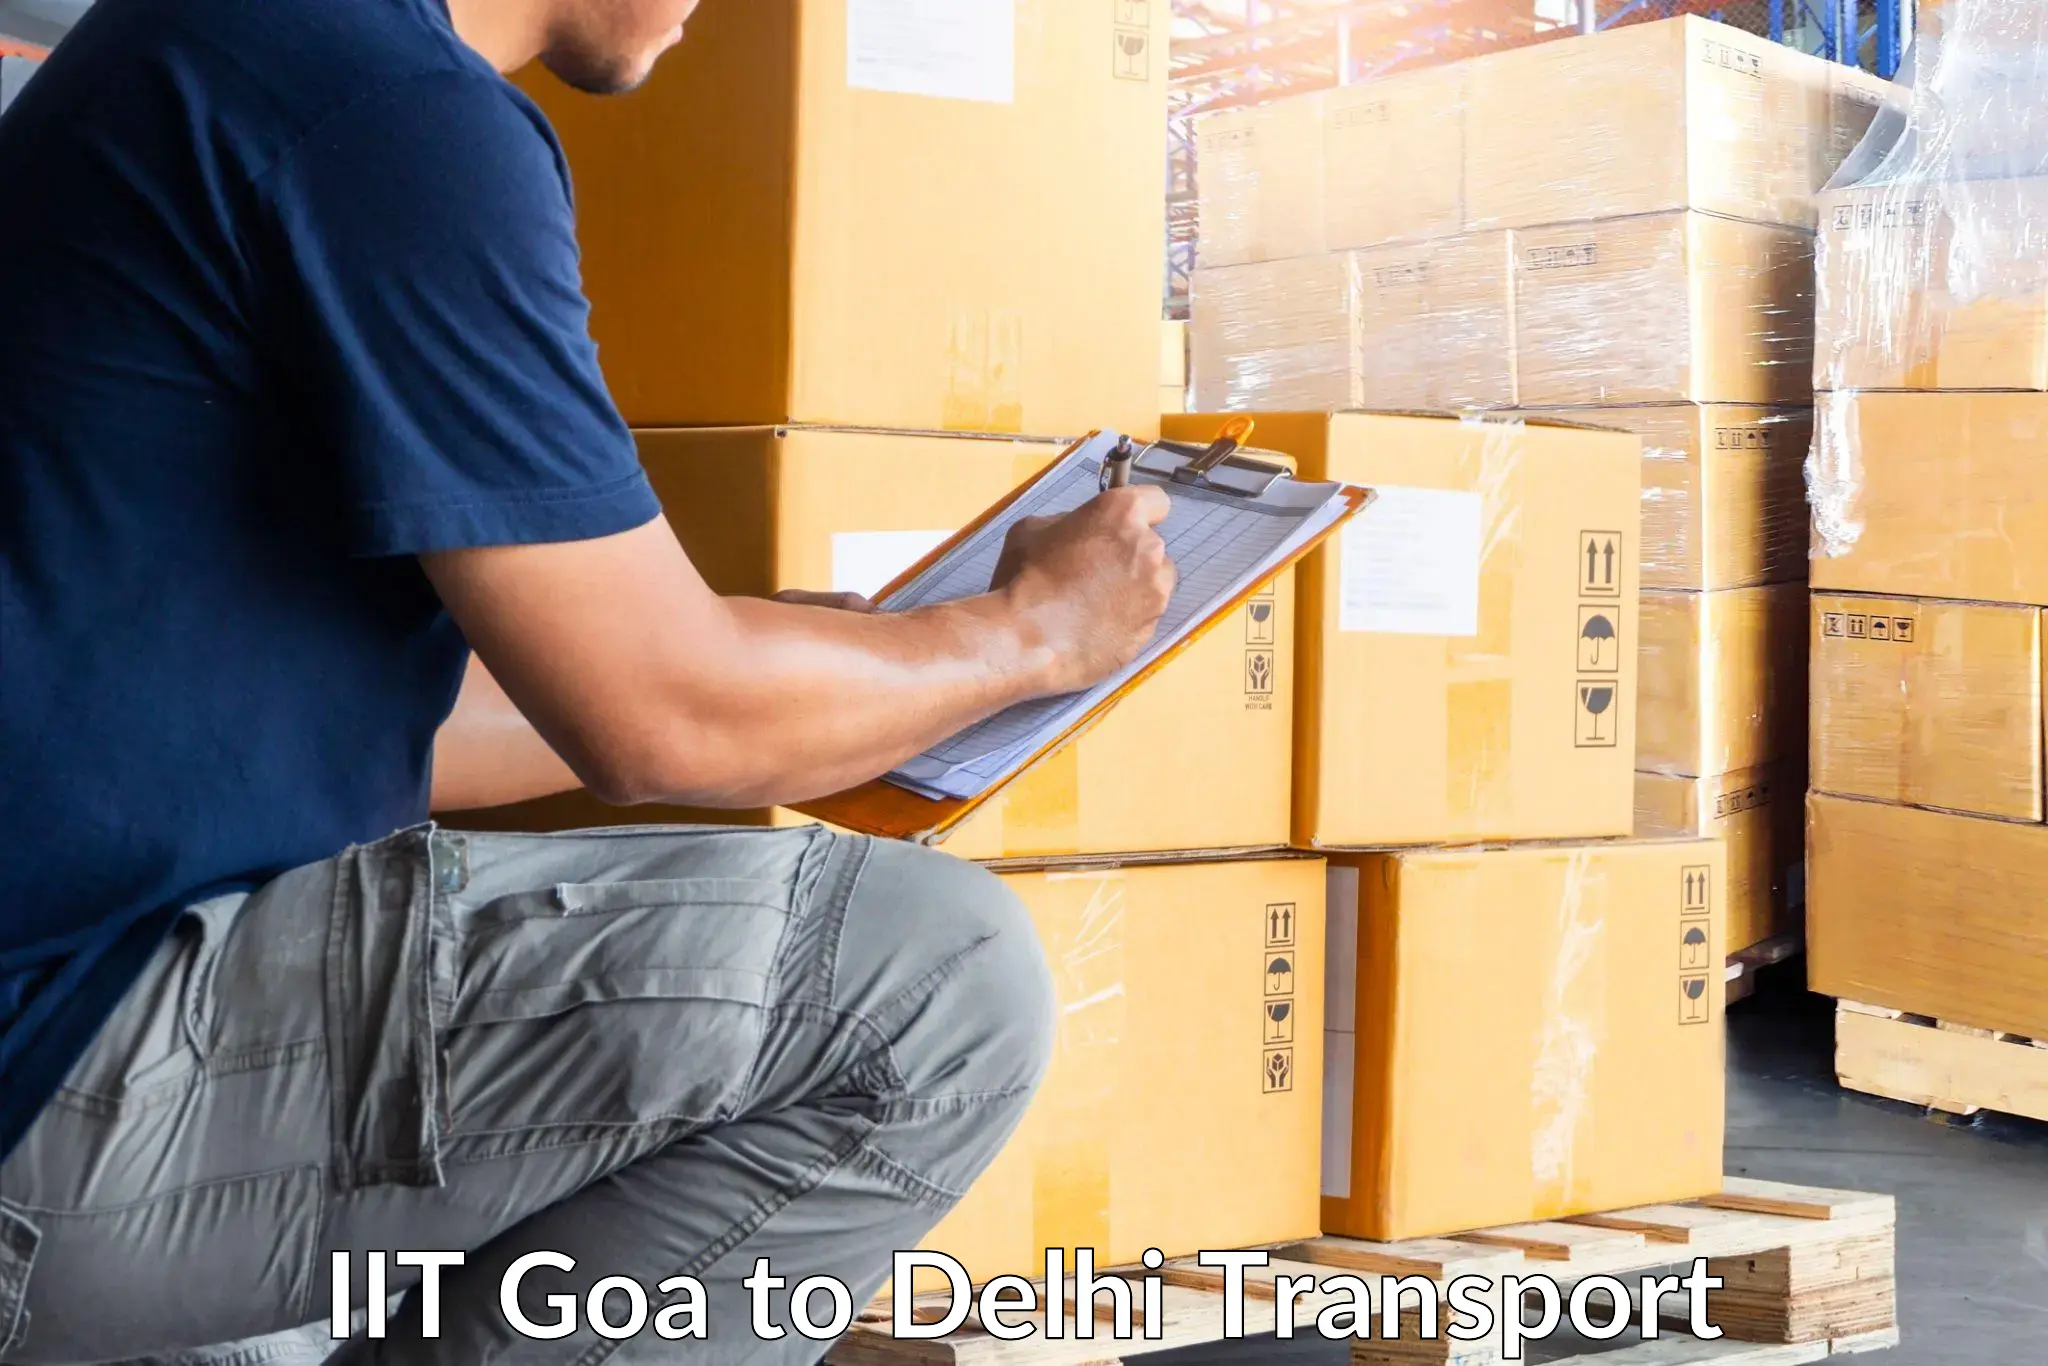 Daily parcel service transport IIT Goa to Indraprastha